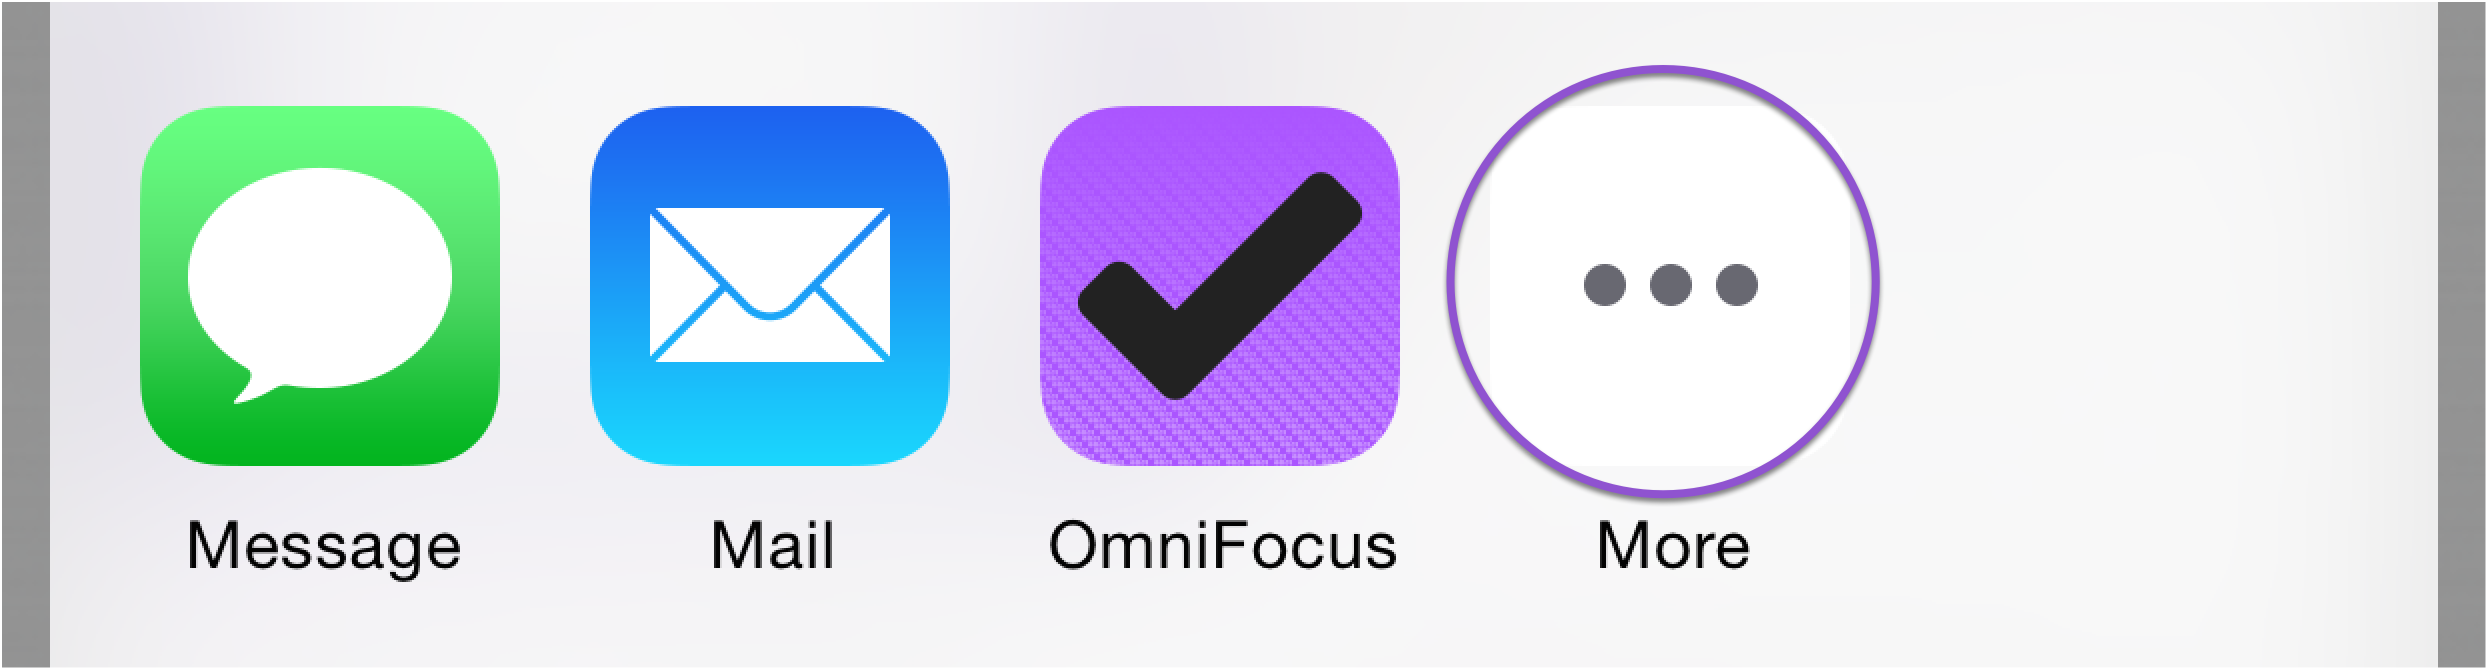 Sharing to OmniFocus for iOS.